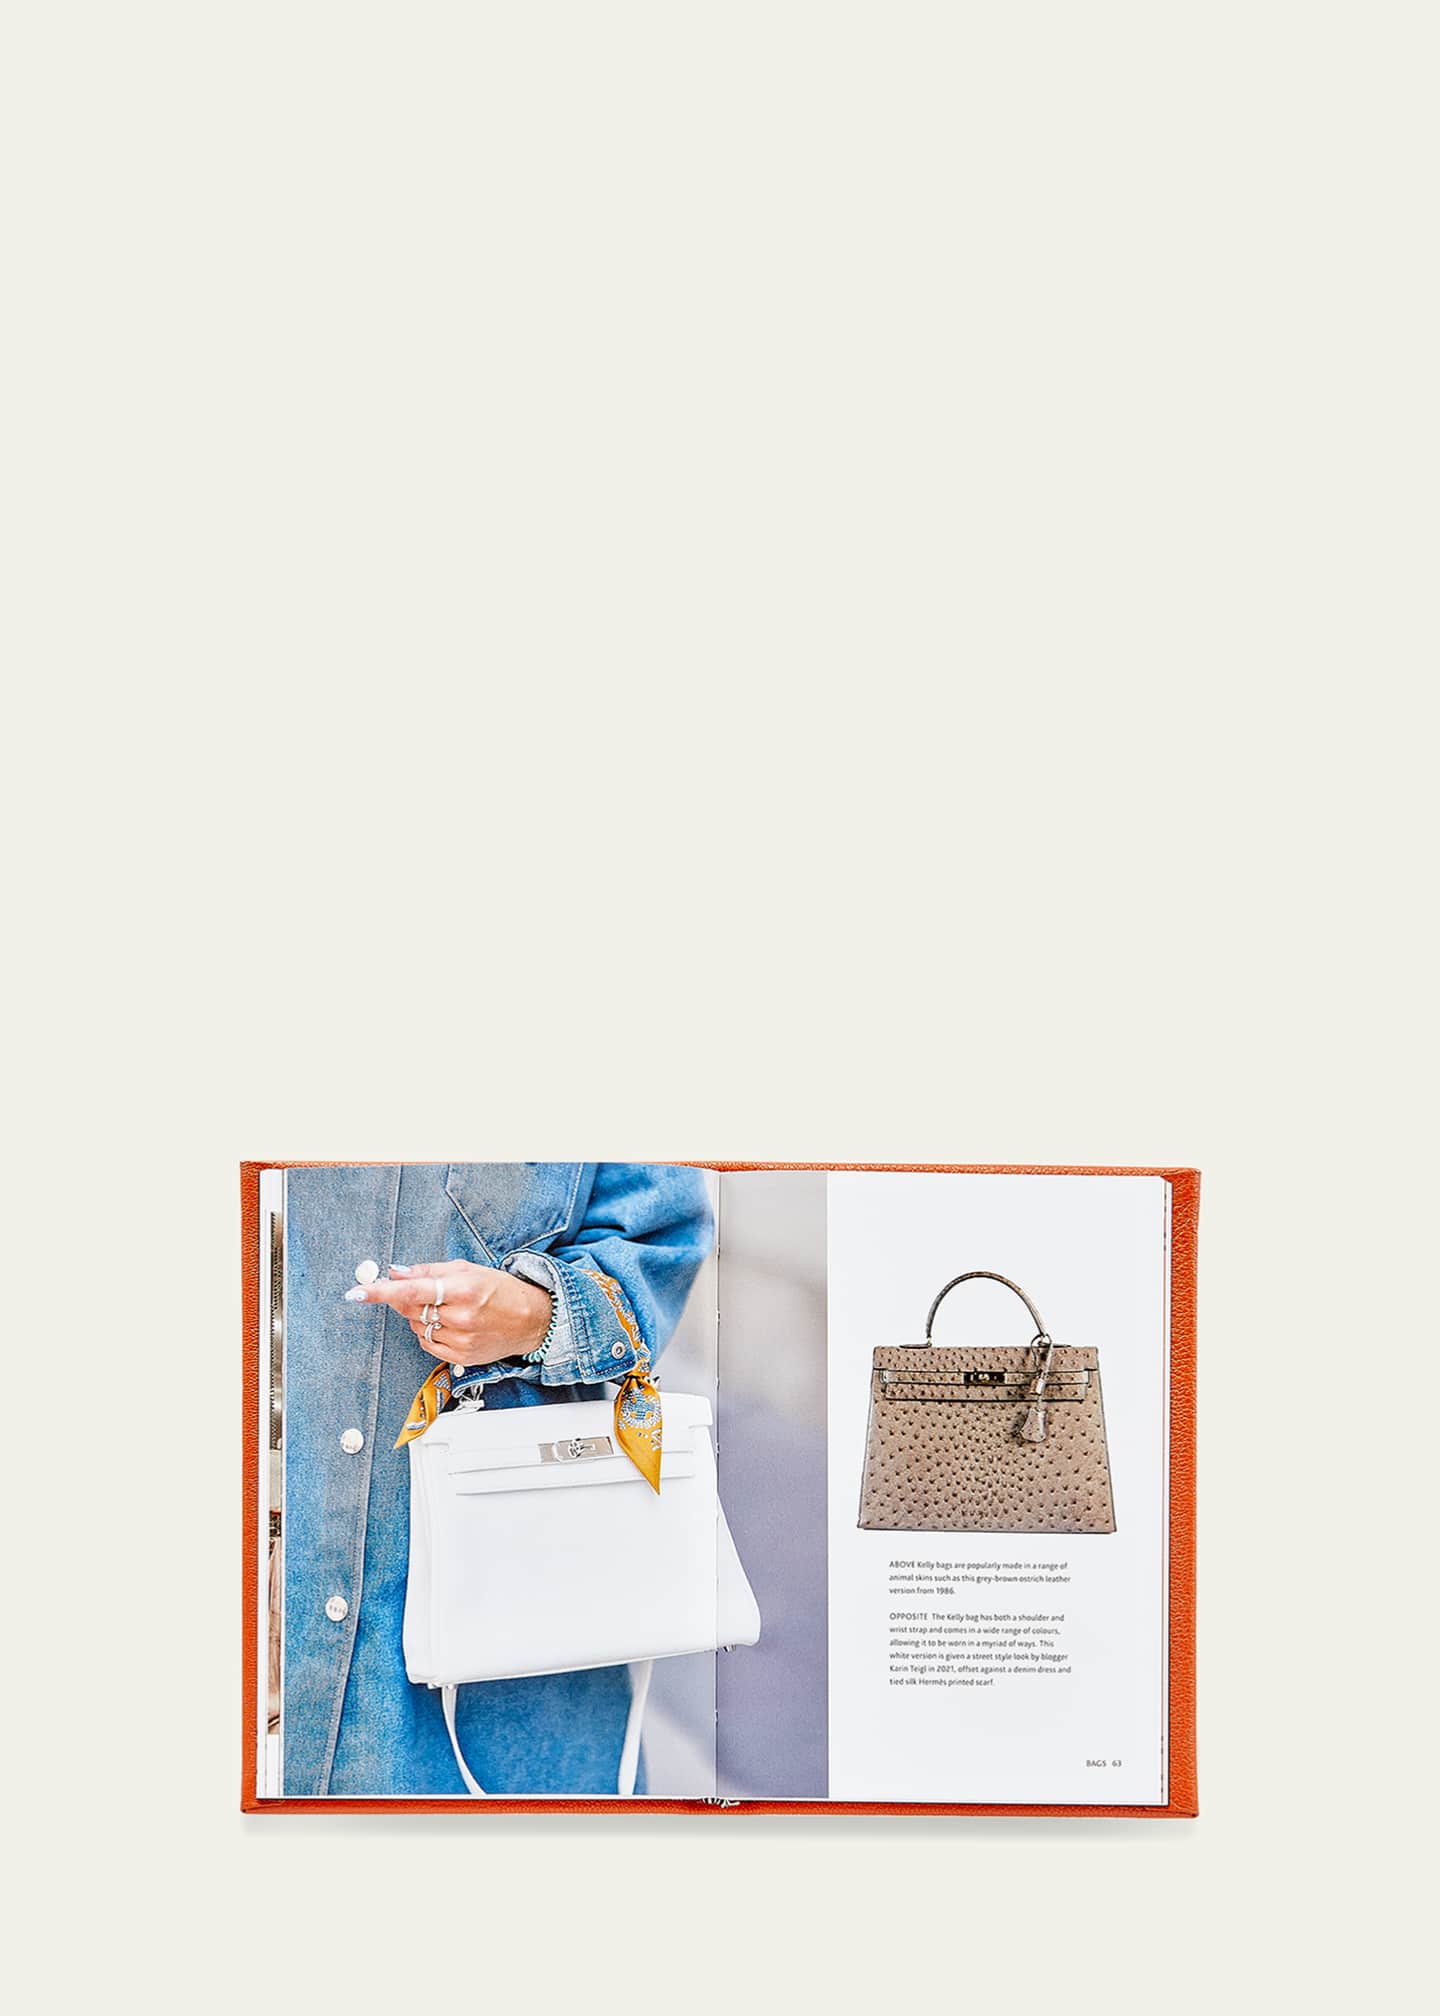 Hermes S/S 2021 campaign